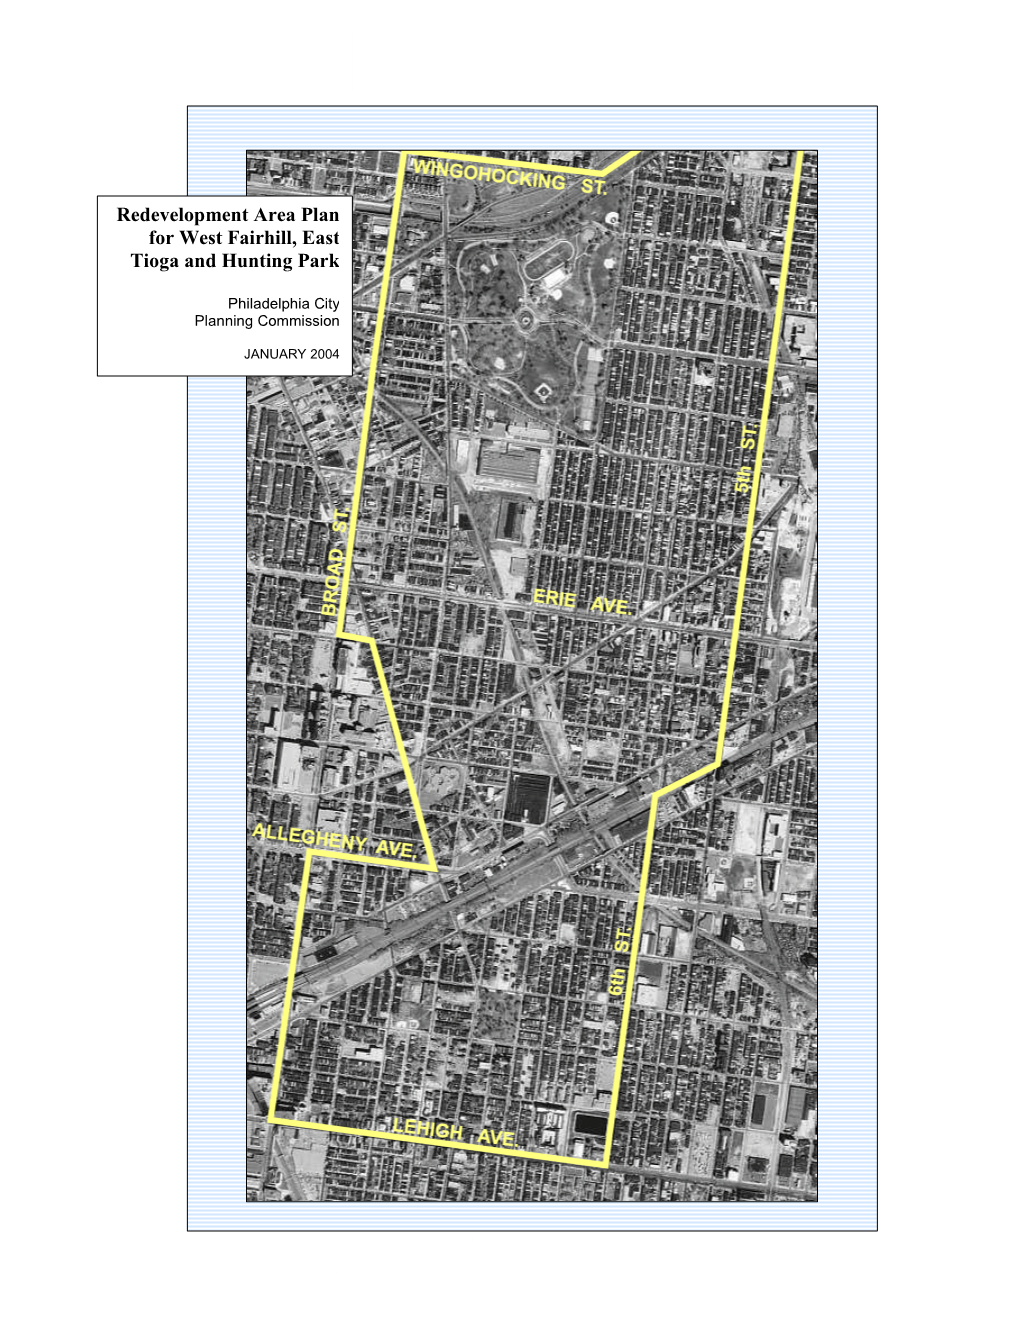 Redevelopment Area Plan for West Fairhill, East Tioga and Hunting Park